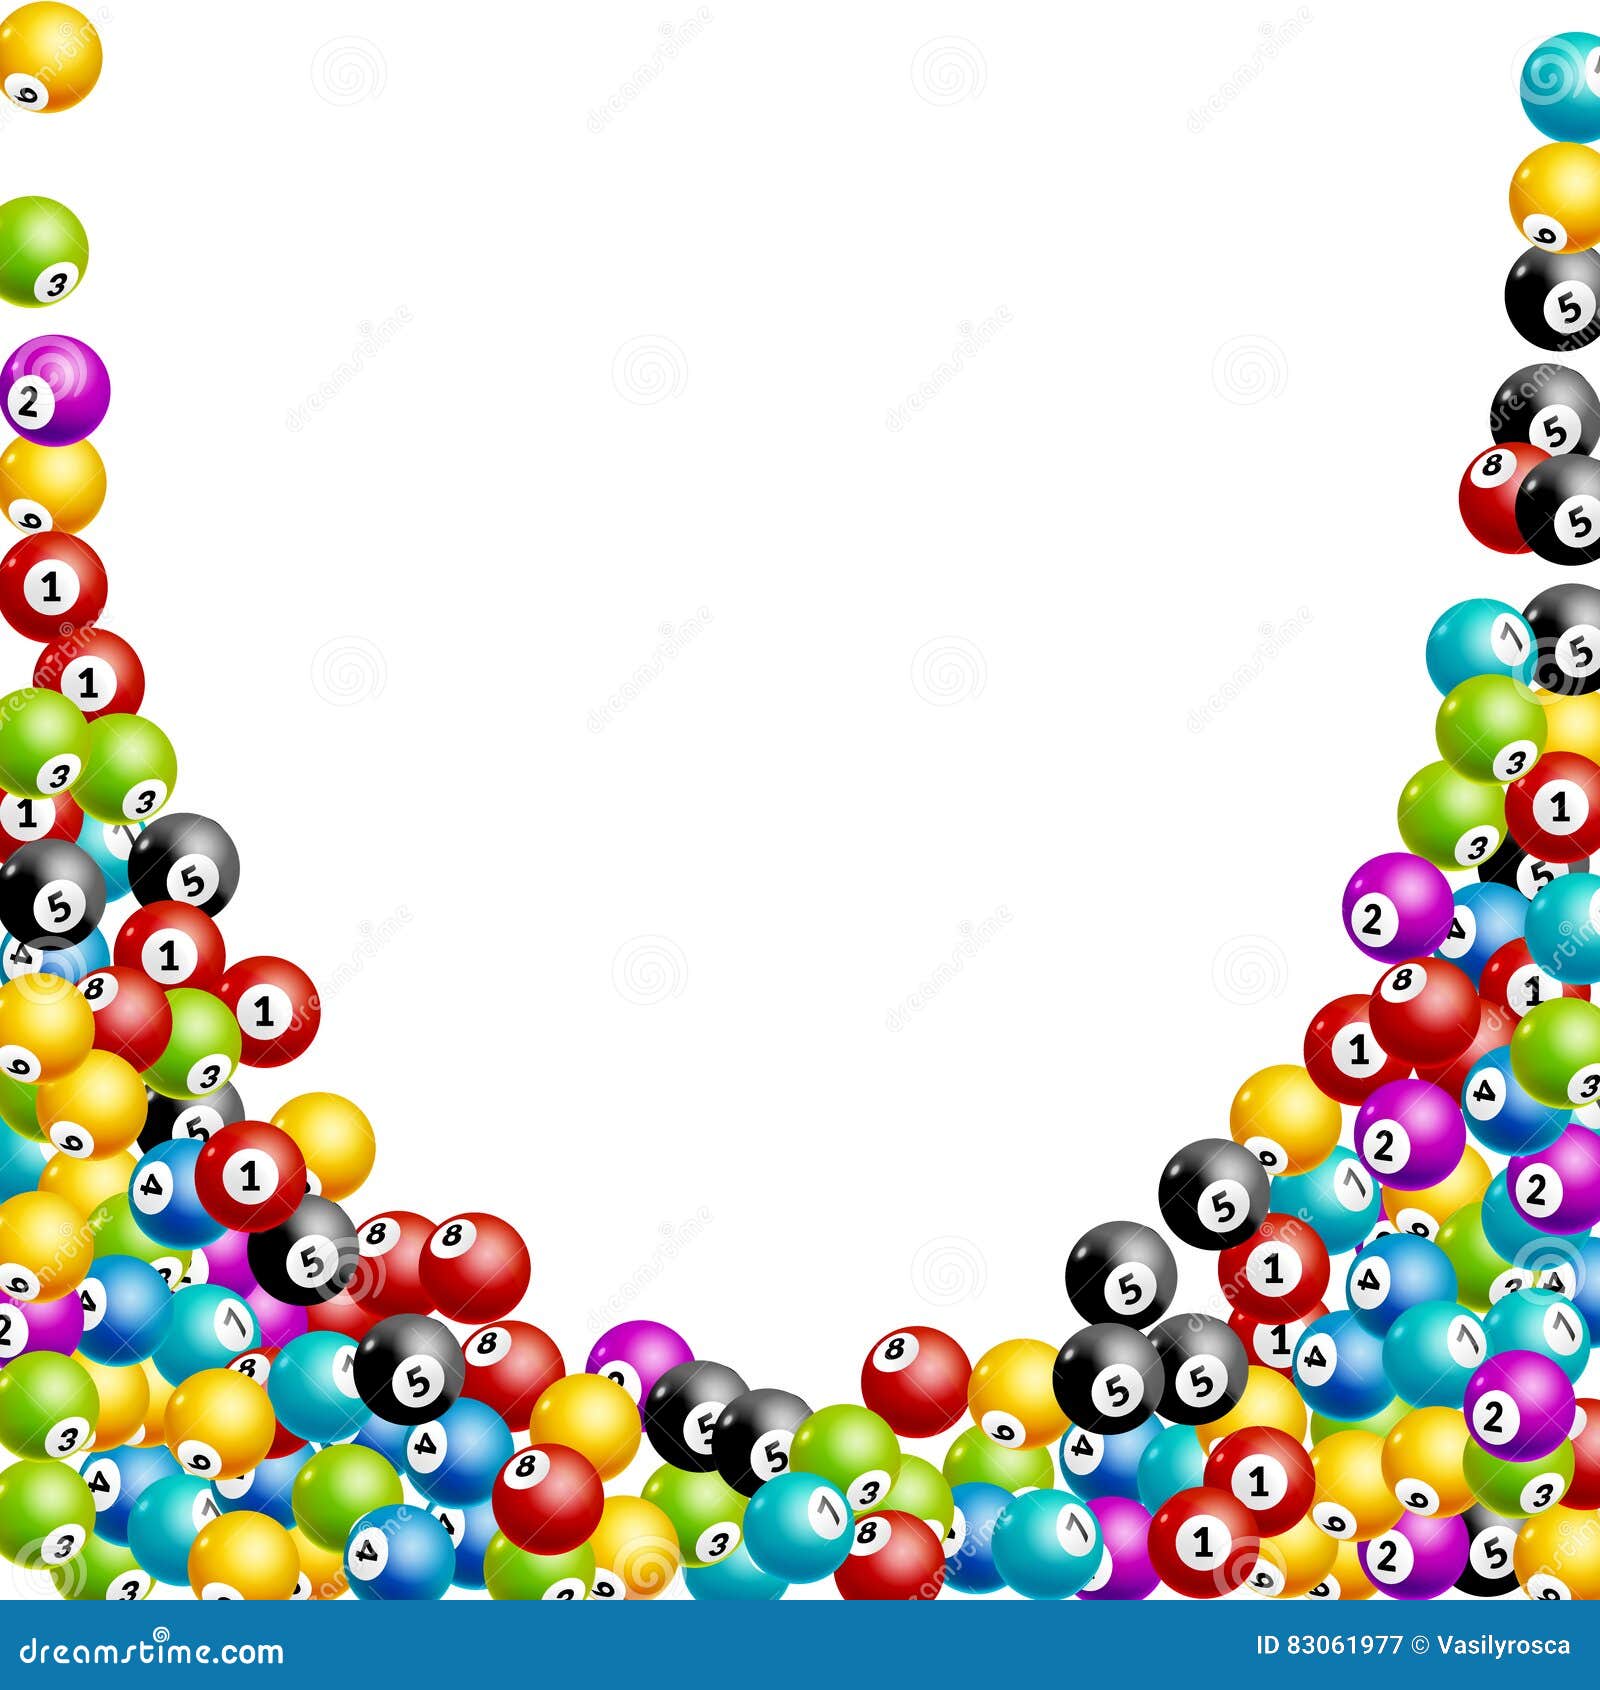 Bingo Lottery Balls Numbers Background. Lottery Game Balls ...
